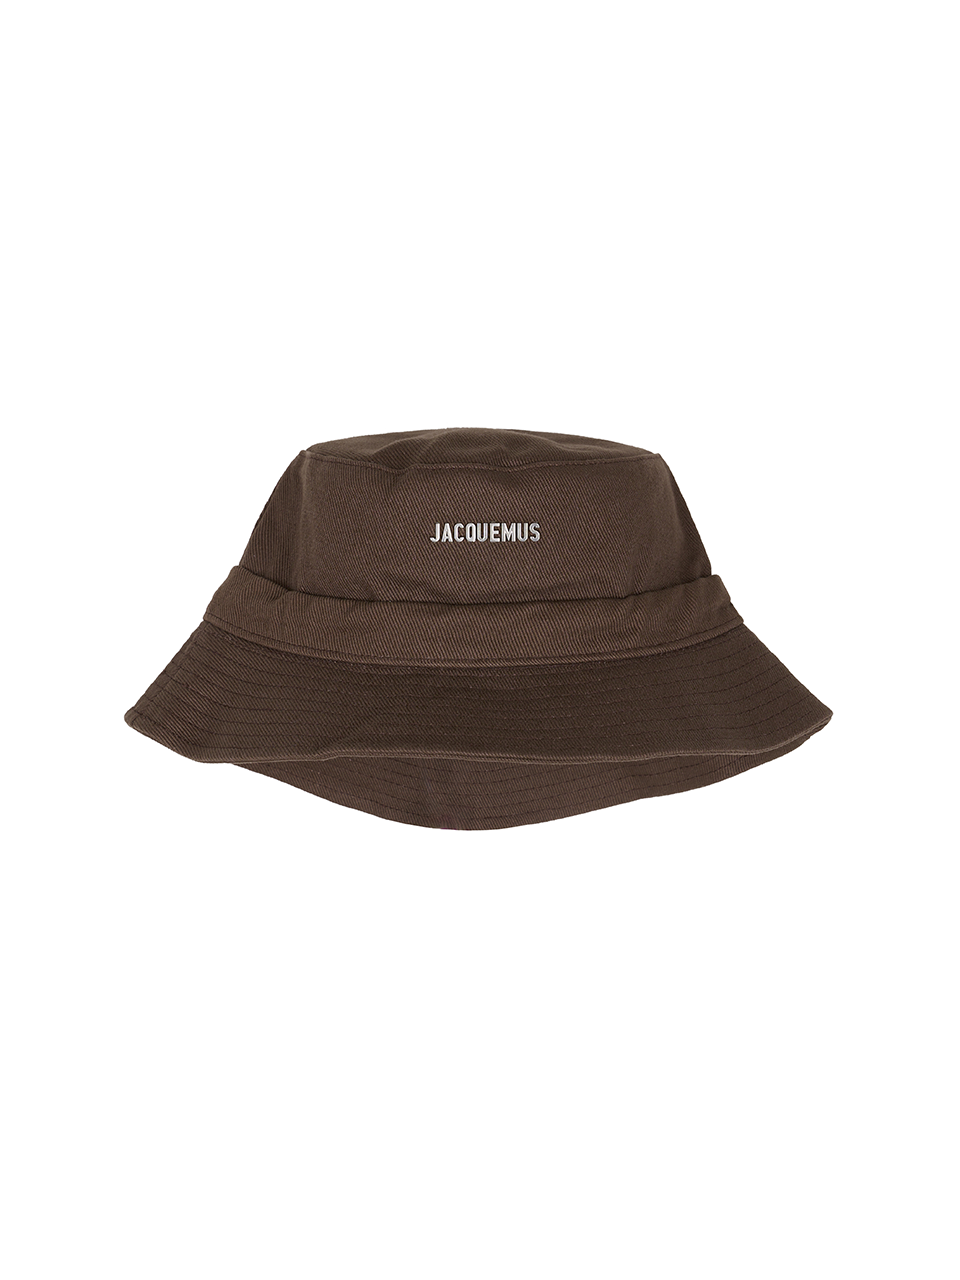 JACQUEMUS - GADJO KNOTTED BUCKET HAT (BROWN)